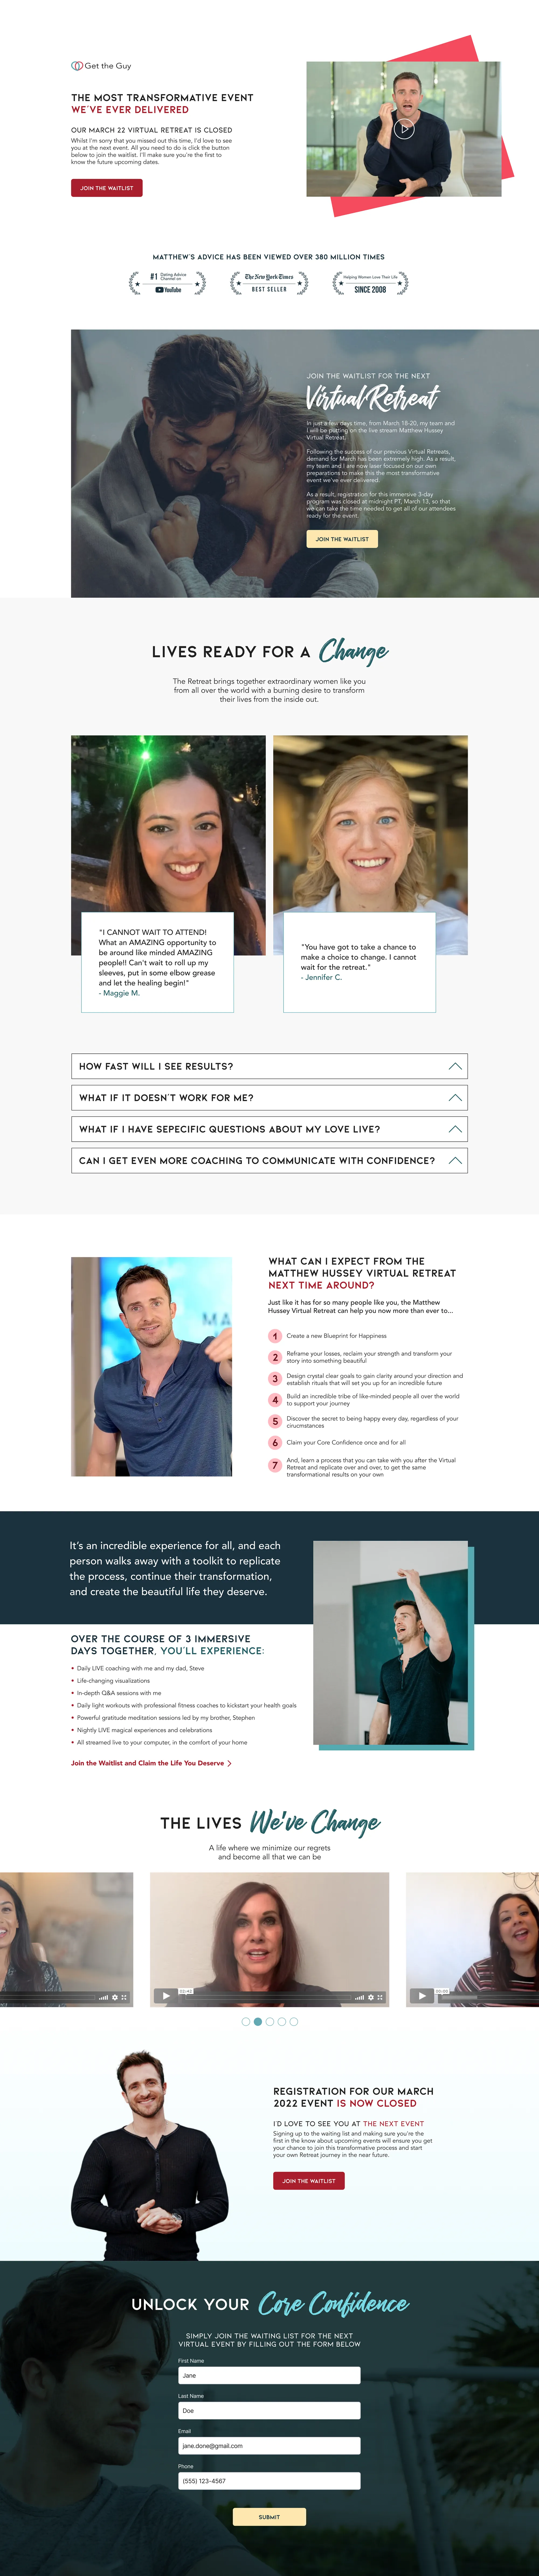 get the guy mobile version of the new landing page: the most transformative event section